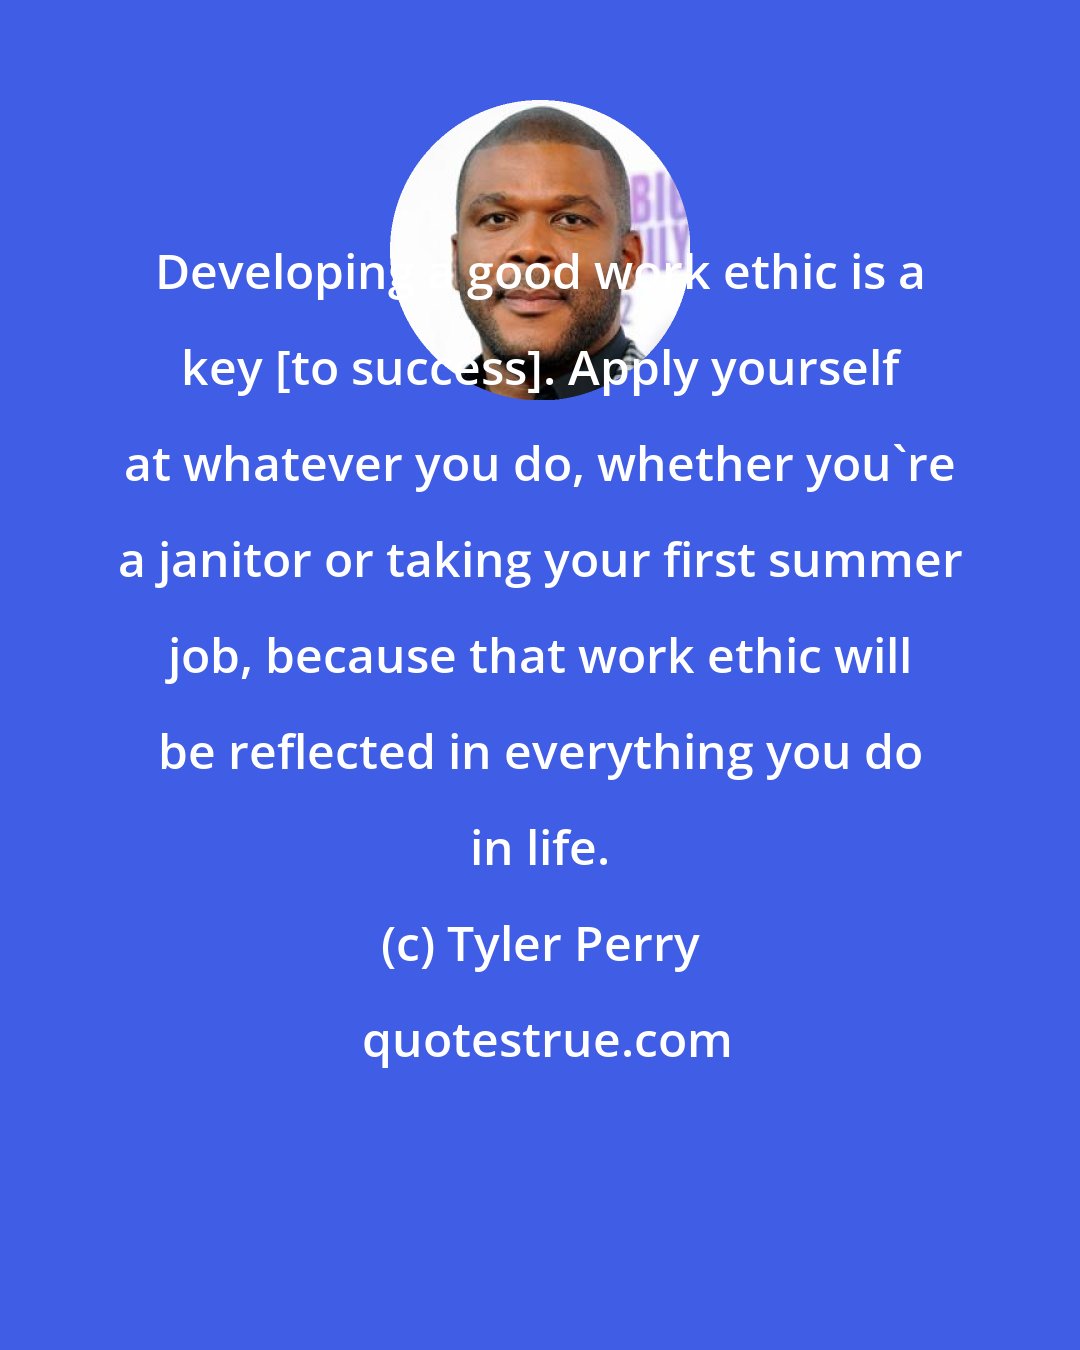 Tyler Perry: Developing a good work ethic is a key [to success]. Apply yourself at whatever you do, whether you're a janitor or taking your first summer job, because that work ethic will be reflected in everything you do in life.